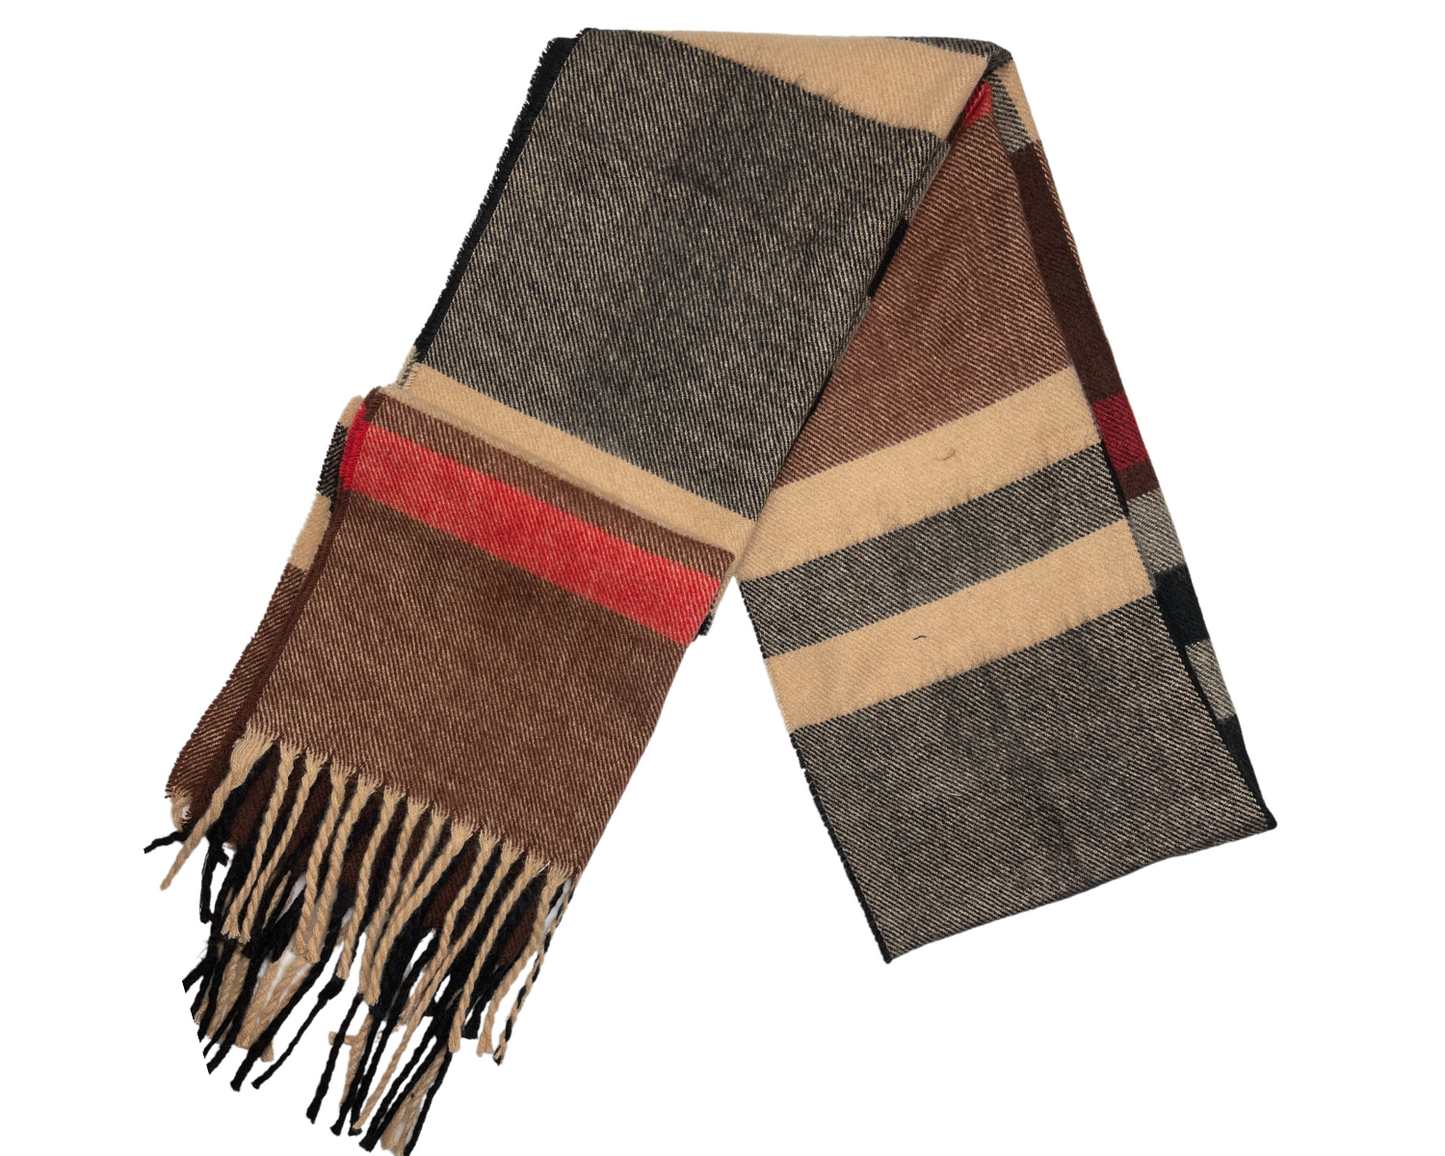 #color_ Black Brown and Red | Relhok Plaid Scarf - Black Brown and Red - 6_a4d9102b-0de0-4595-a8a6-043dfdaa4c63